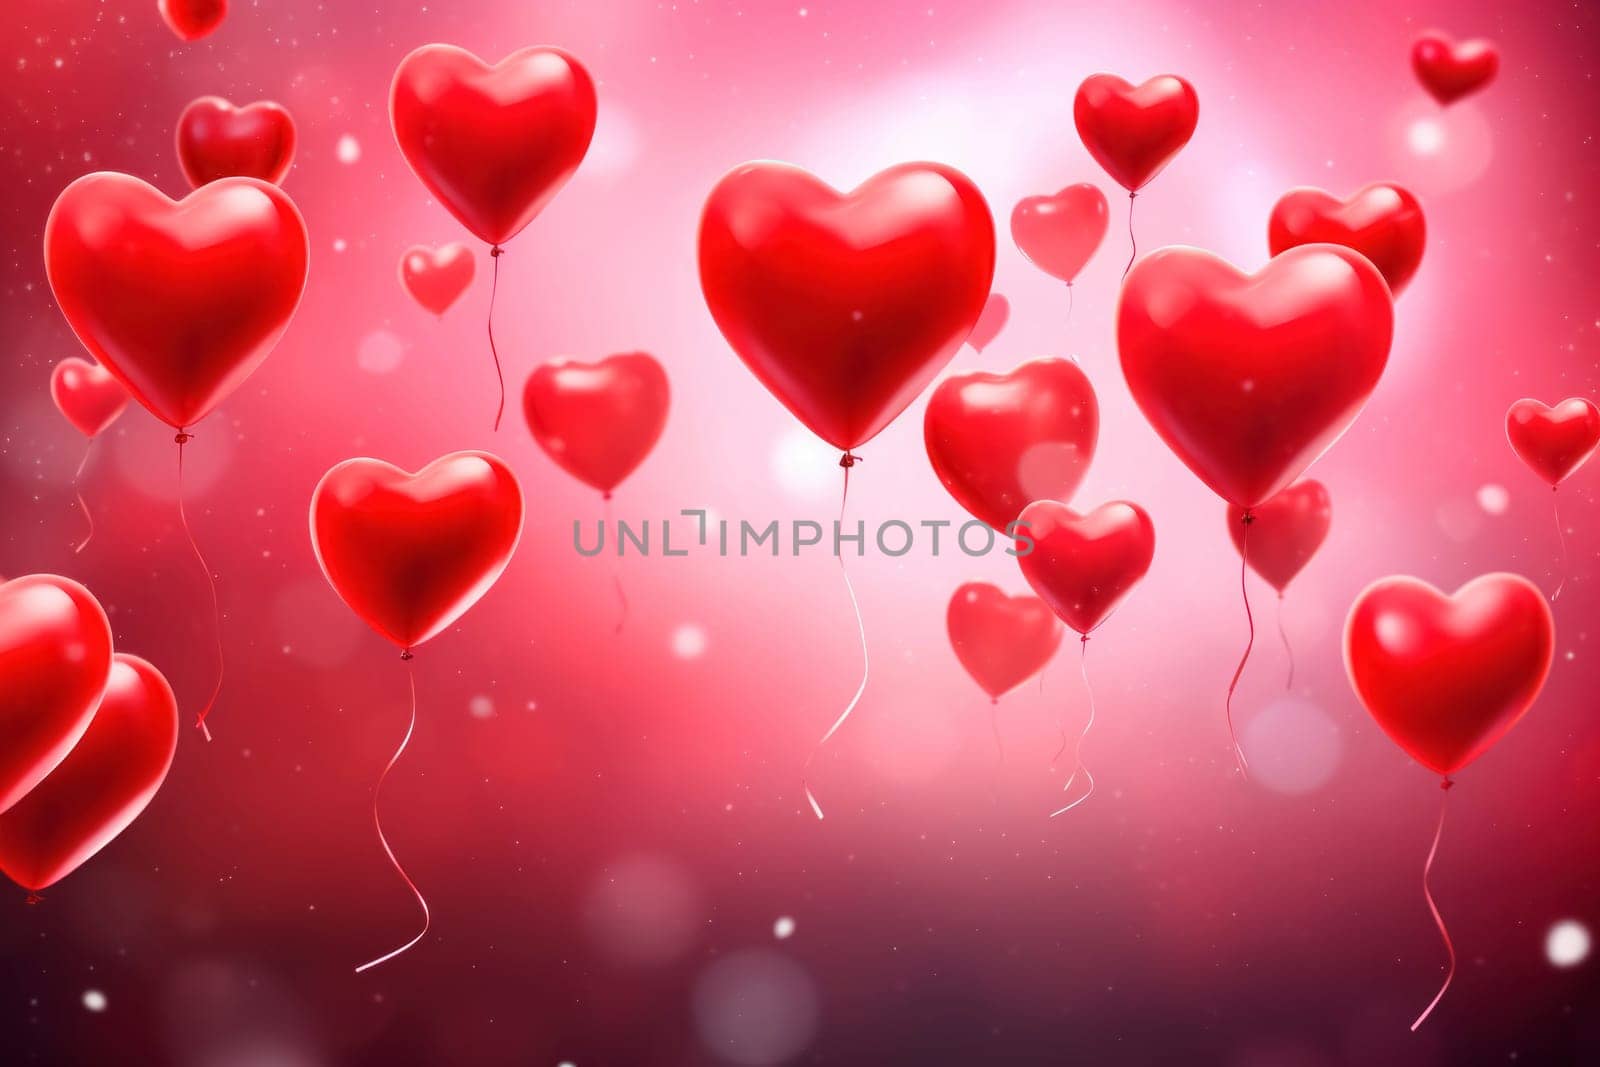 Glowing Heart-Shaped Balloons in Magical Ambiance by andreyz